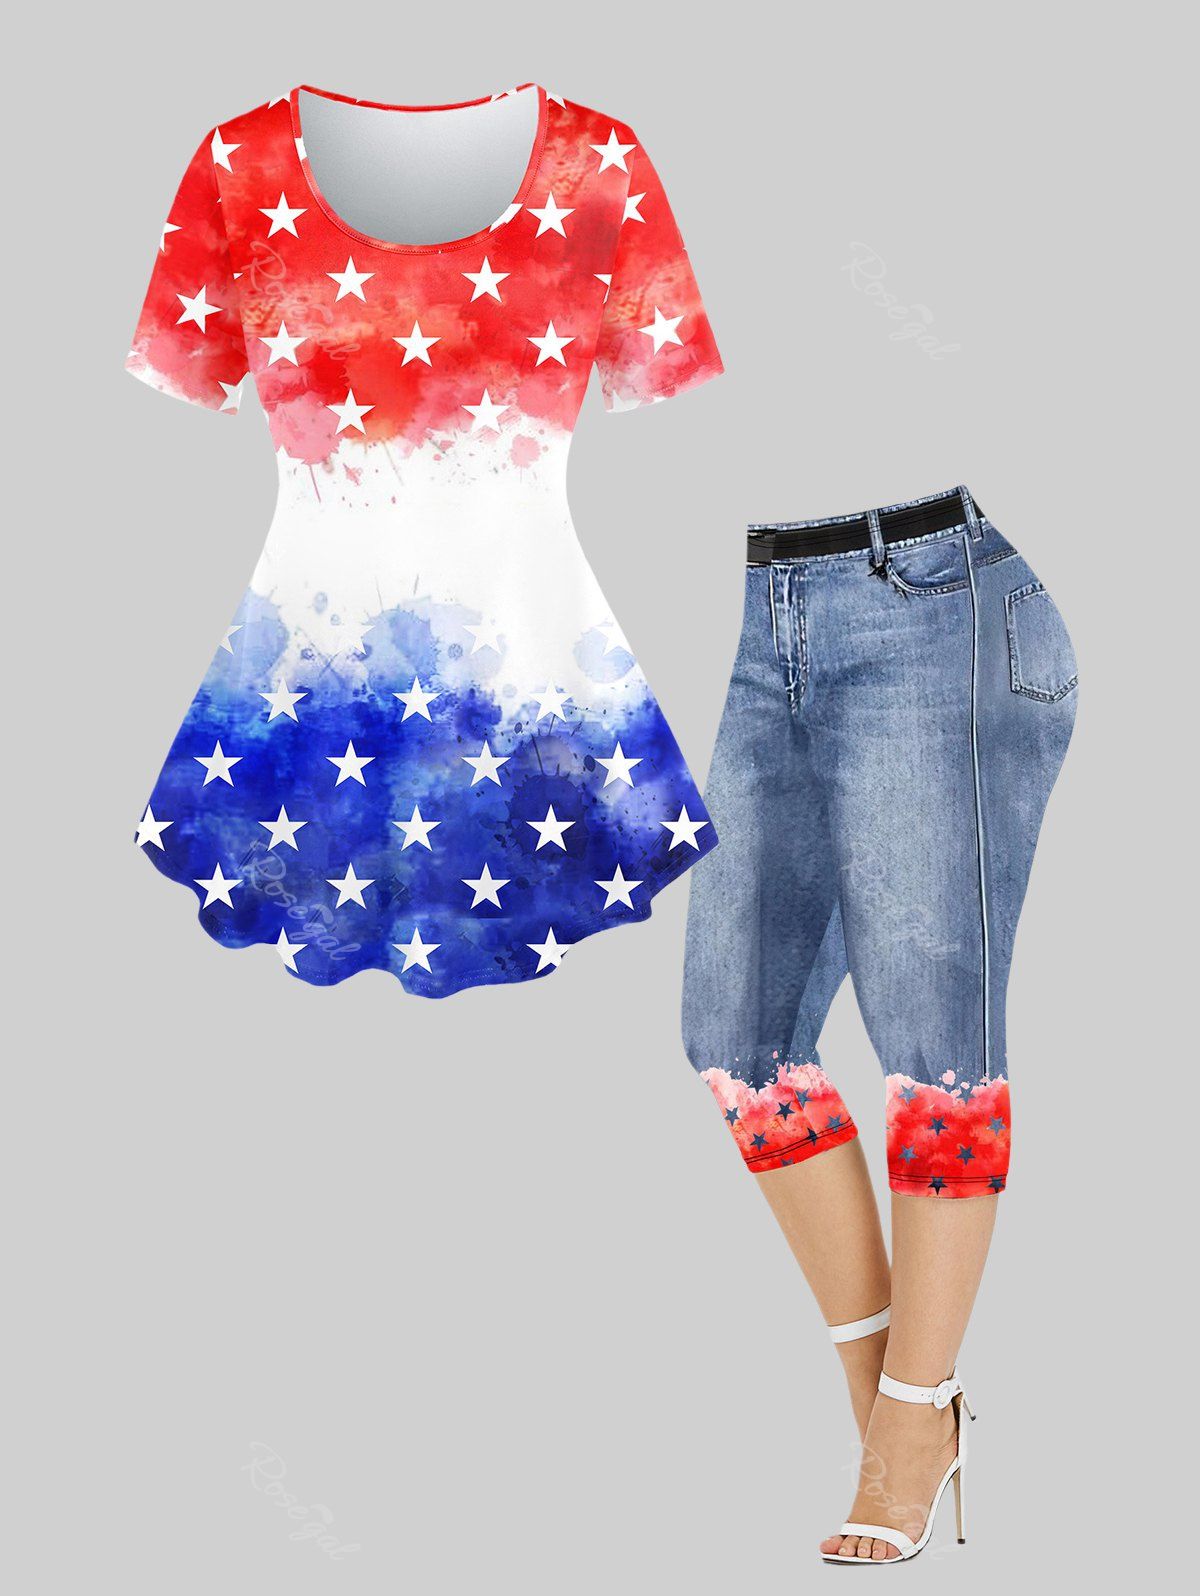 Fancy Plus Size Star Printed Colorblock Tee and 3D Jeans Star Chains Printed Leggings Outfit Bundle  